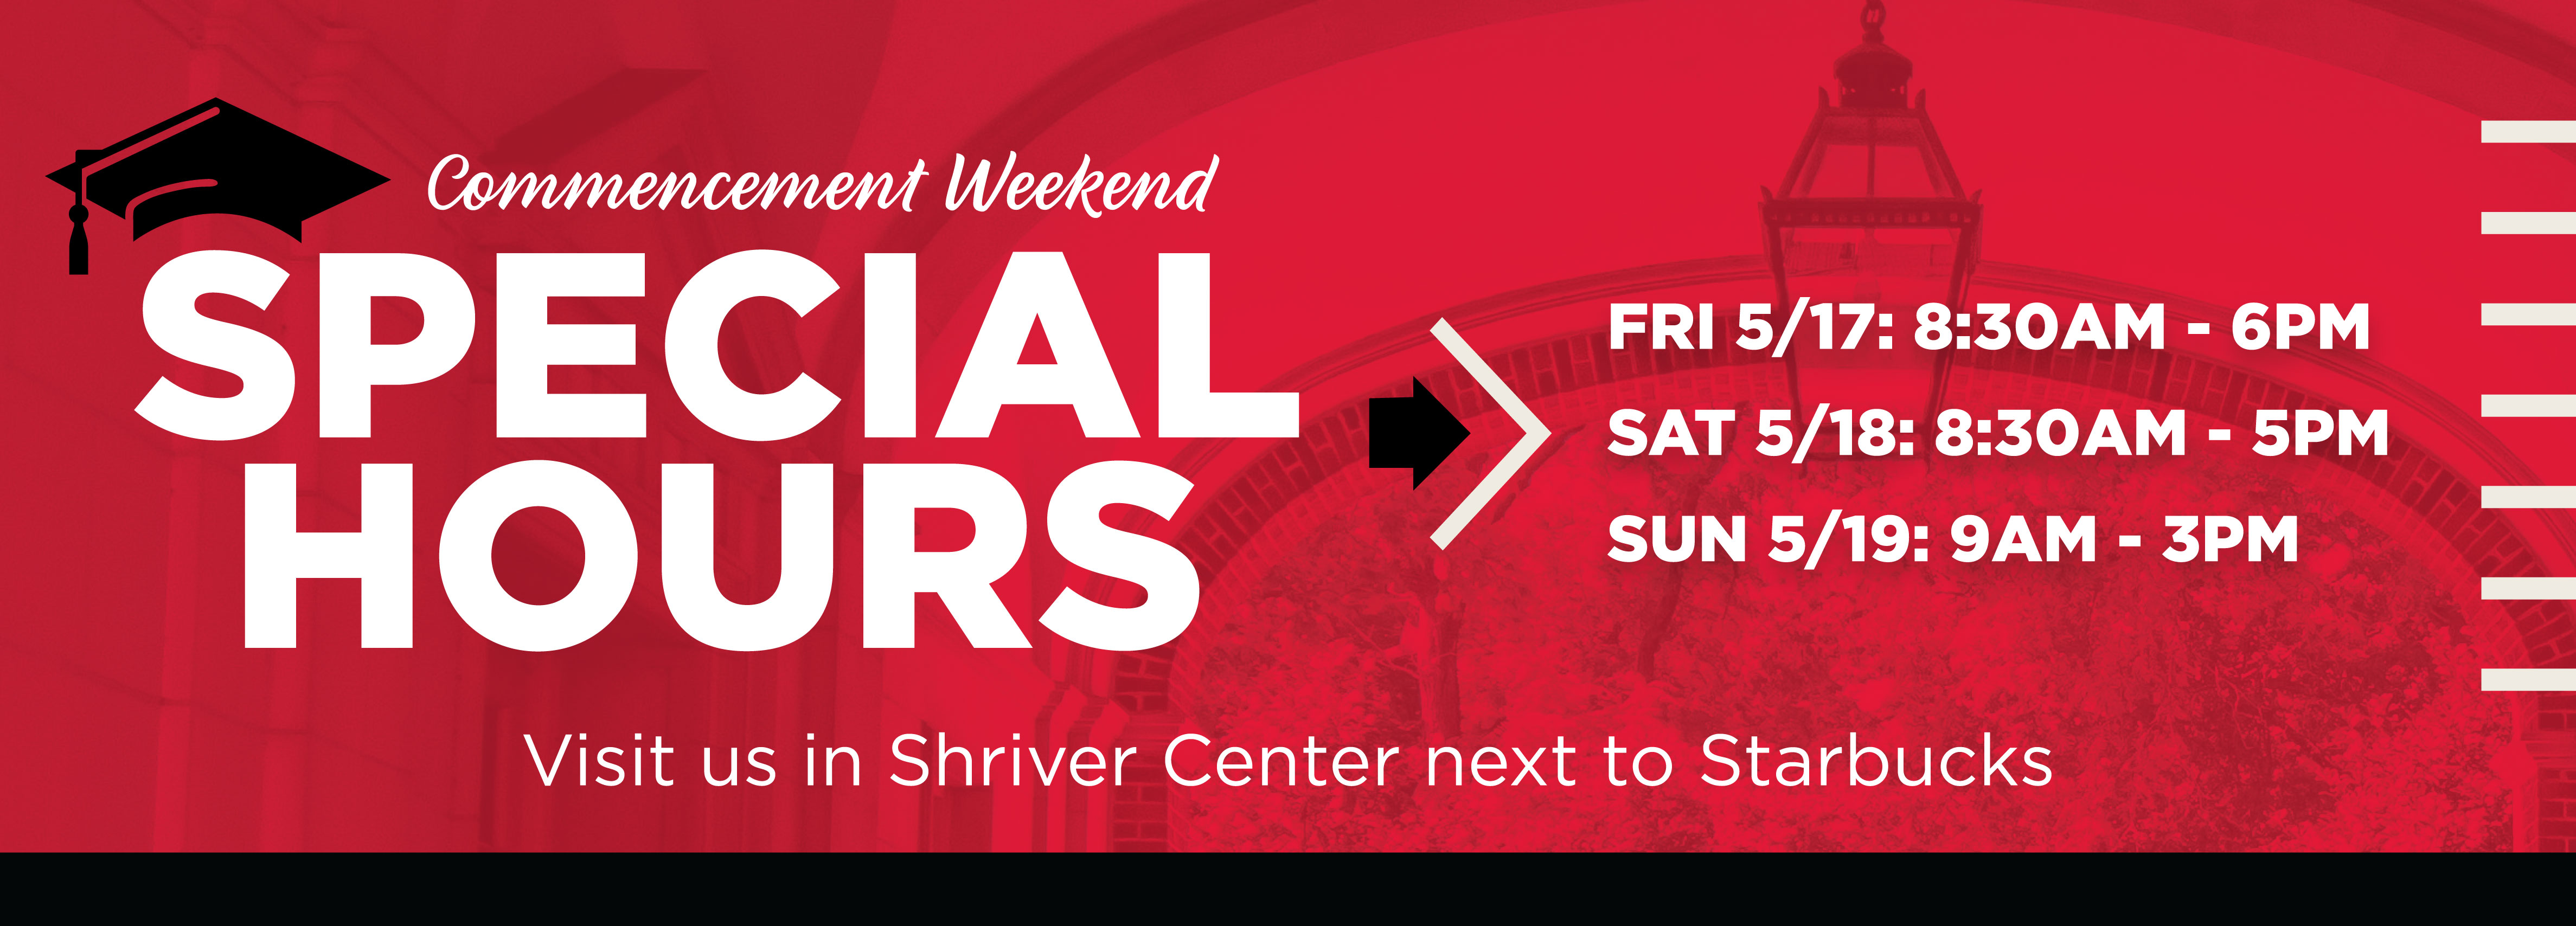 Commencement Weekend Special Hours FRI 5/17: 8:30AM - 6PM SAT 5/18: 8:30AM - 5PM  SUN 5/19: 9AM - 3PM Visit us in Shriver Center next to Starbucks